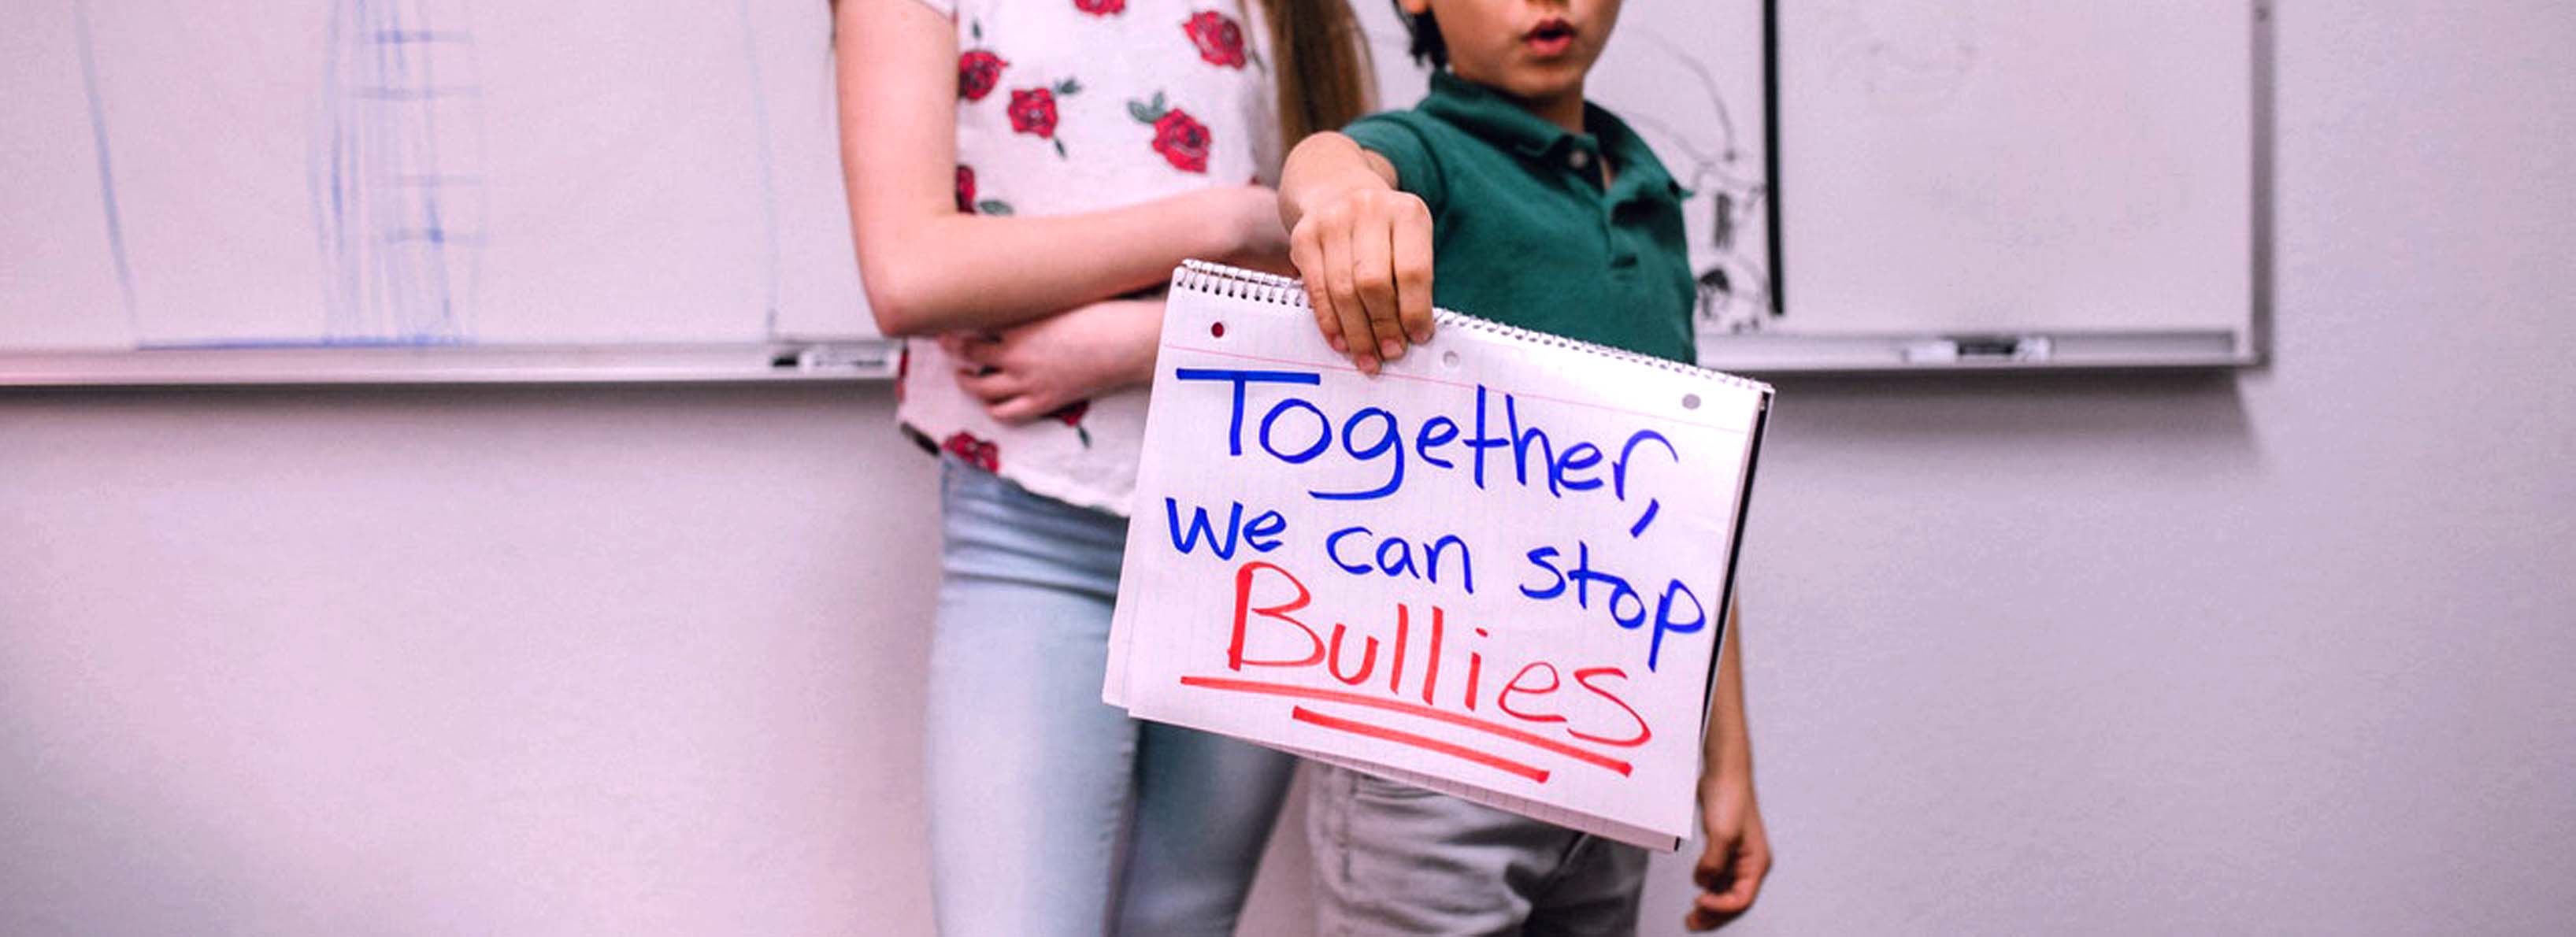 Boy holding a sign saying together we can stop bullies